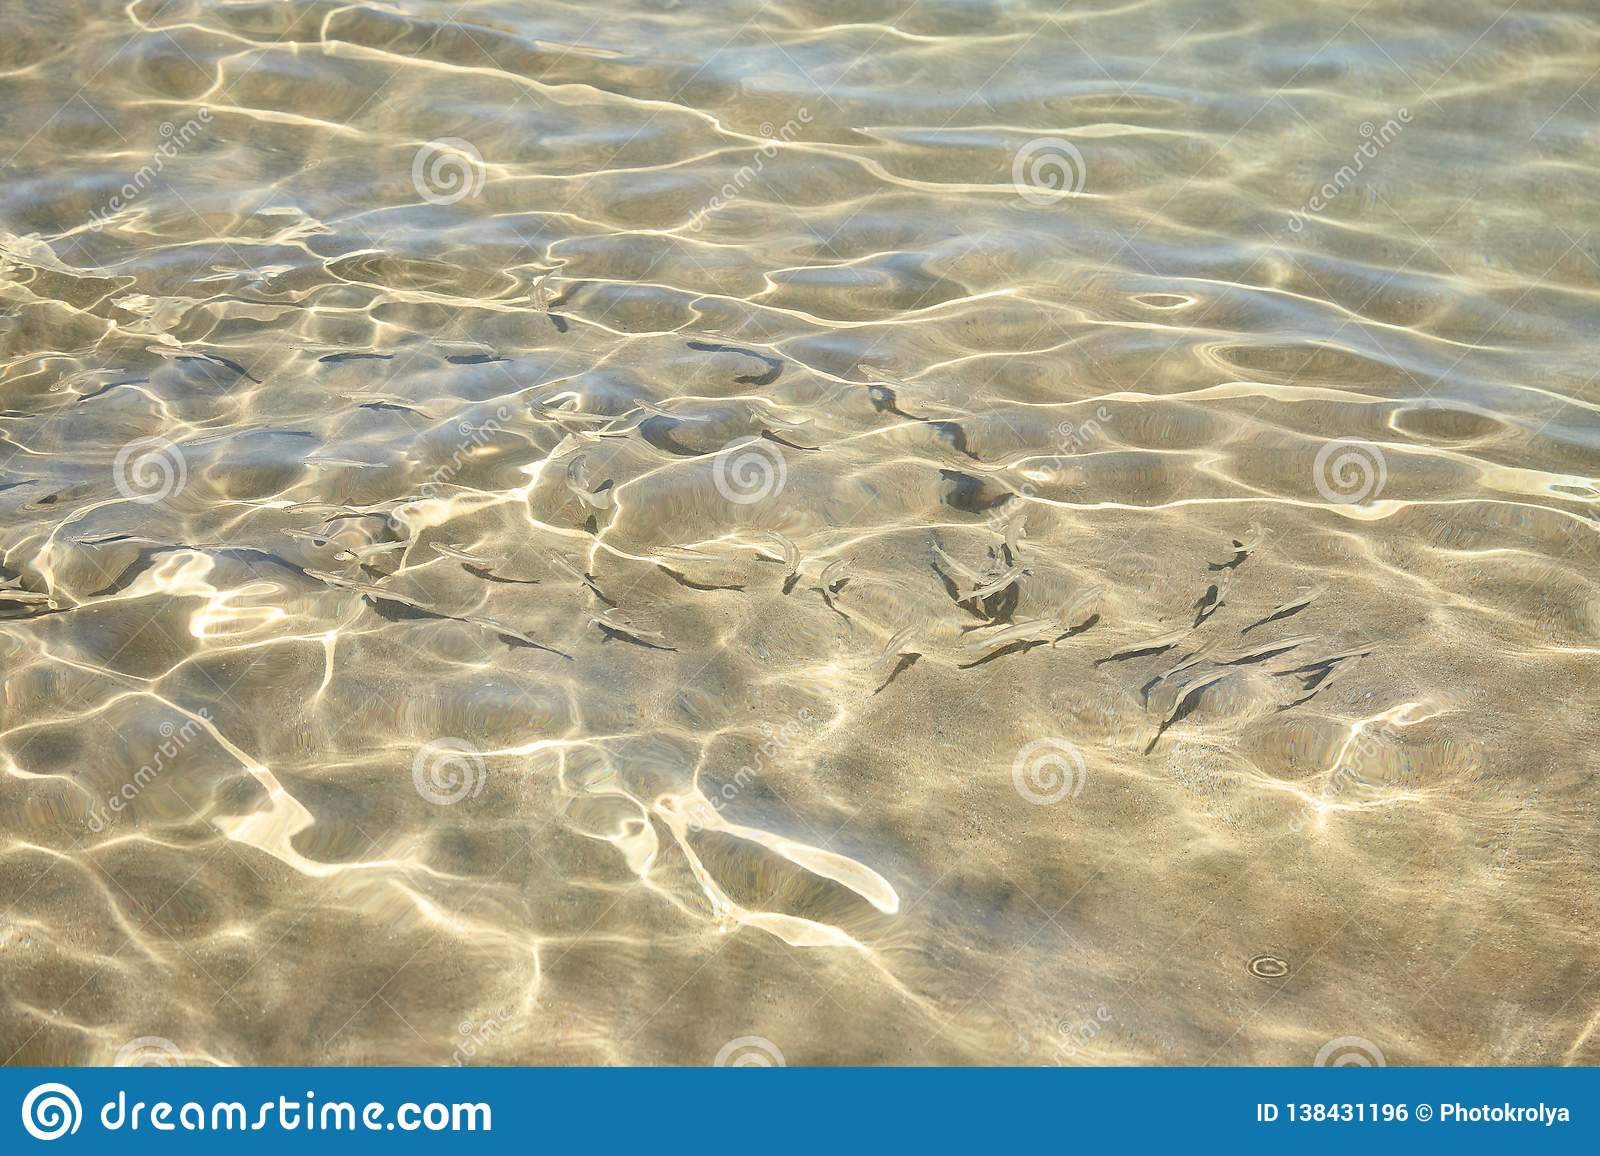 What are the tiny fish at the beach?